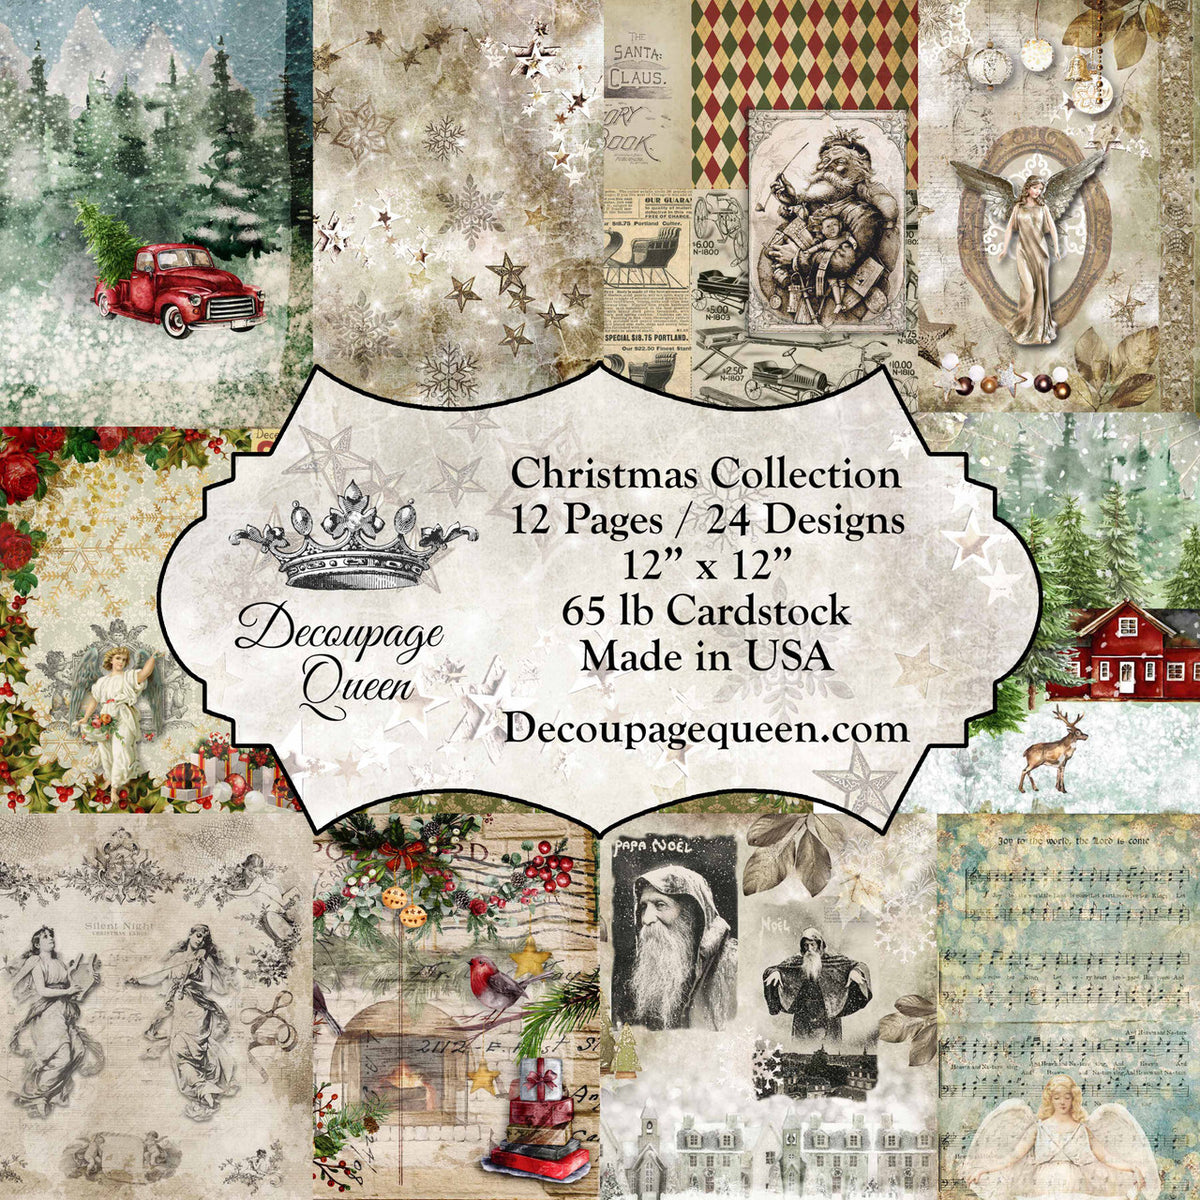 Santa's Workshop Christmas Tissue Paper Collection, Exclusive Scalloped  Edge, 72 Sheets Each 19 x 25, Patterns and Solids